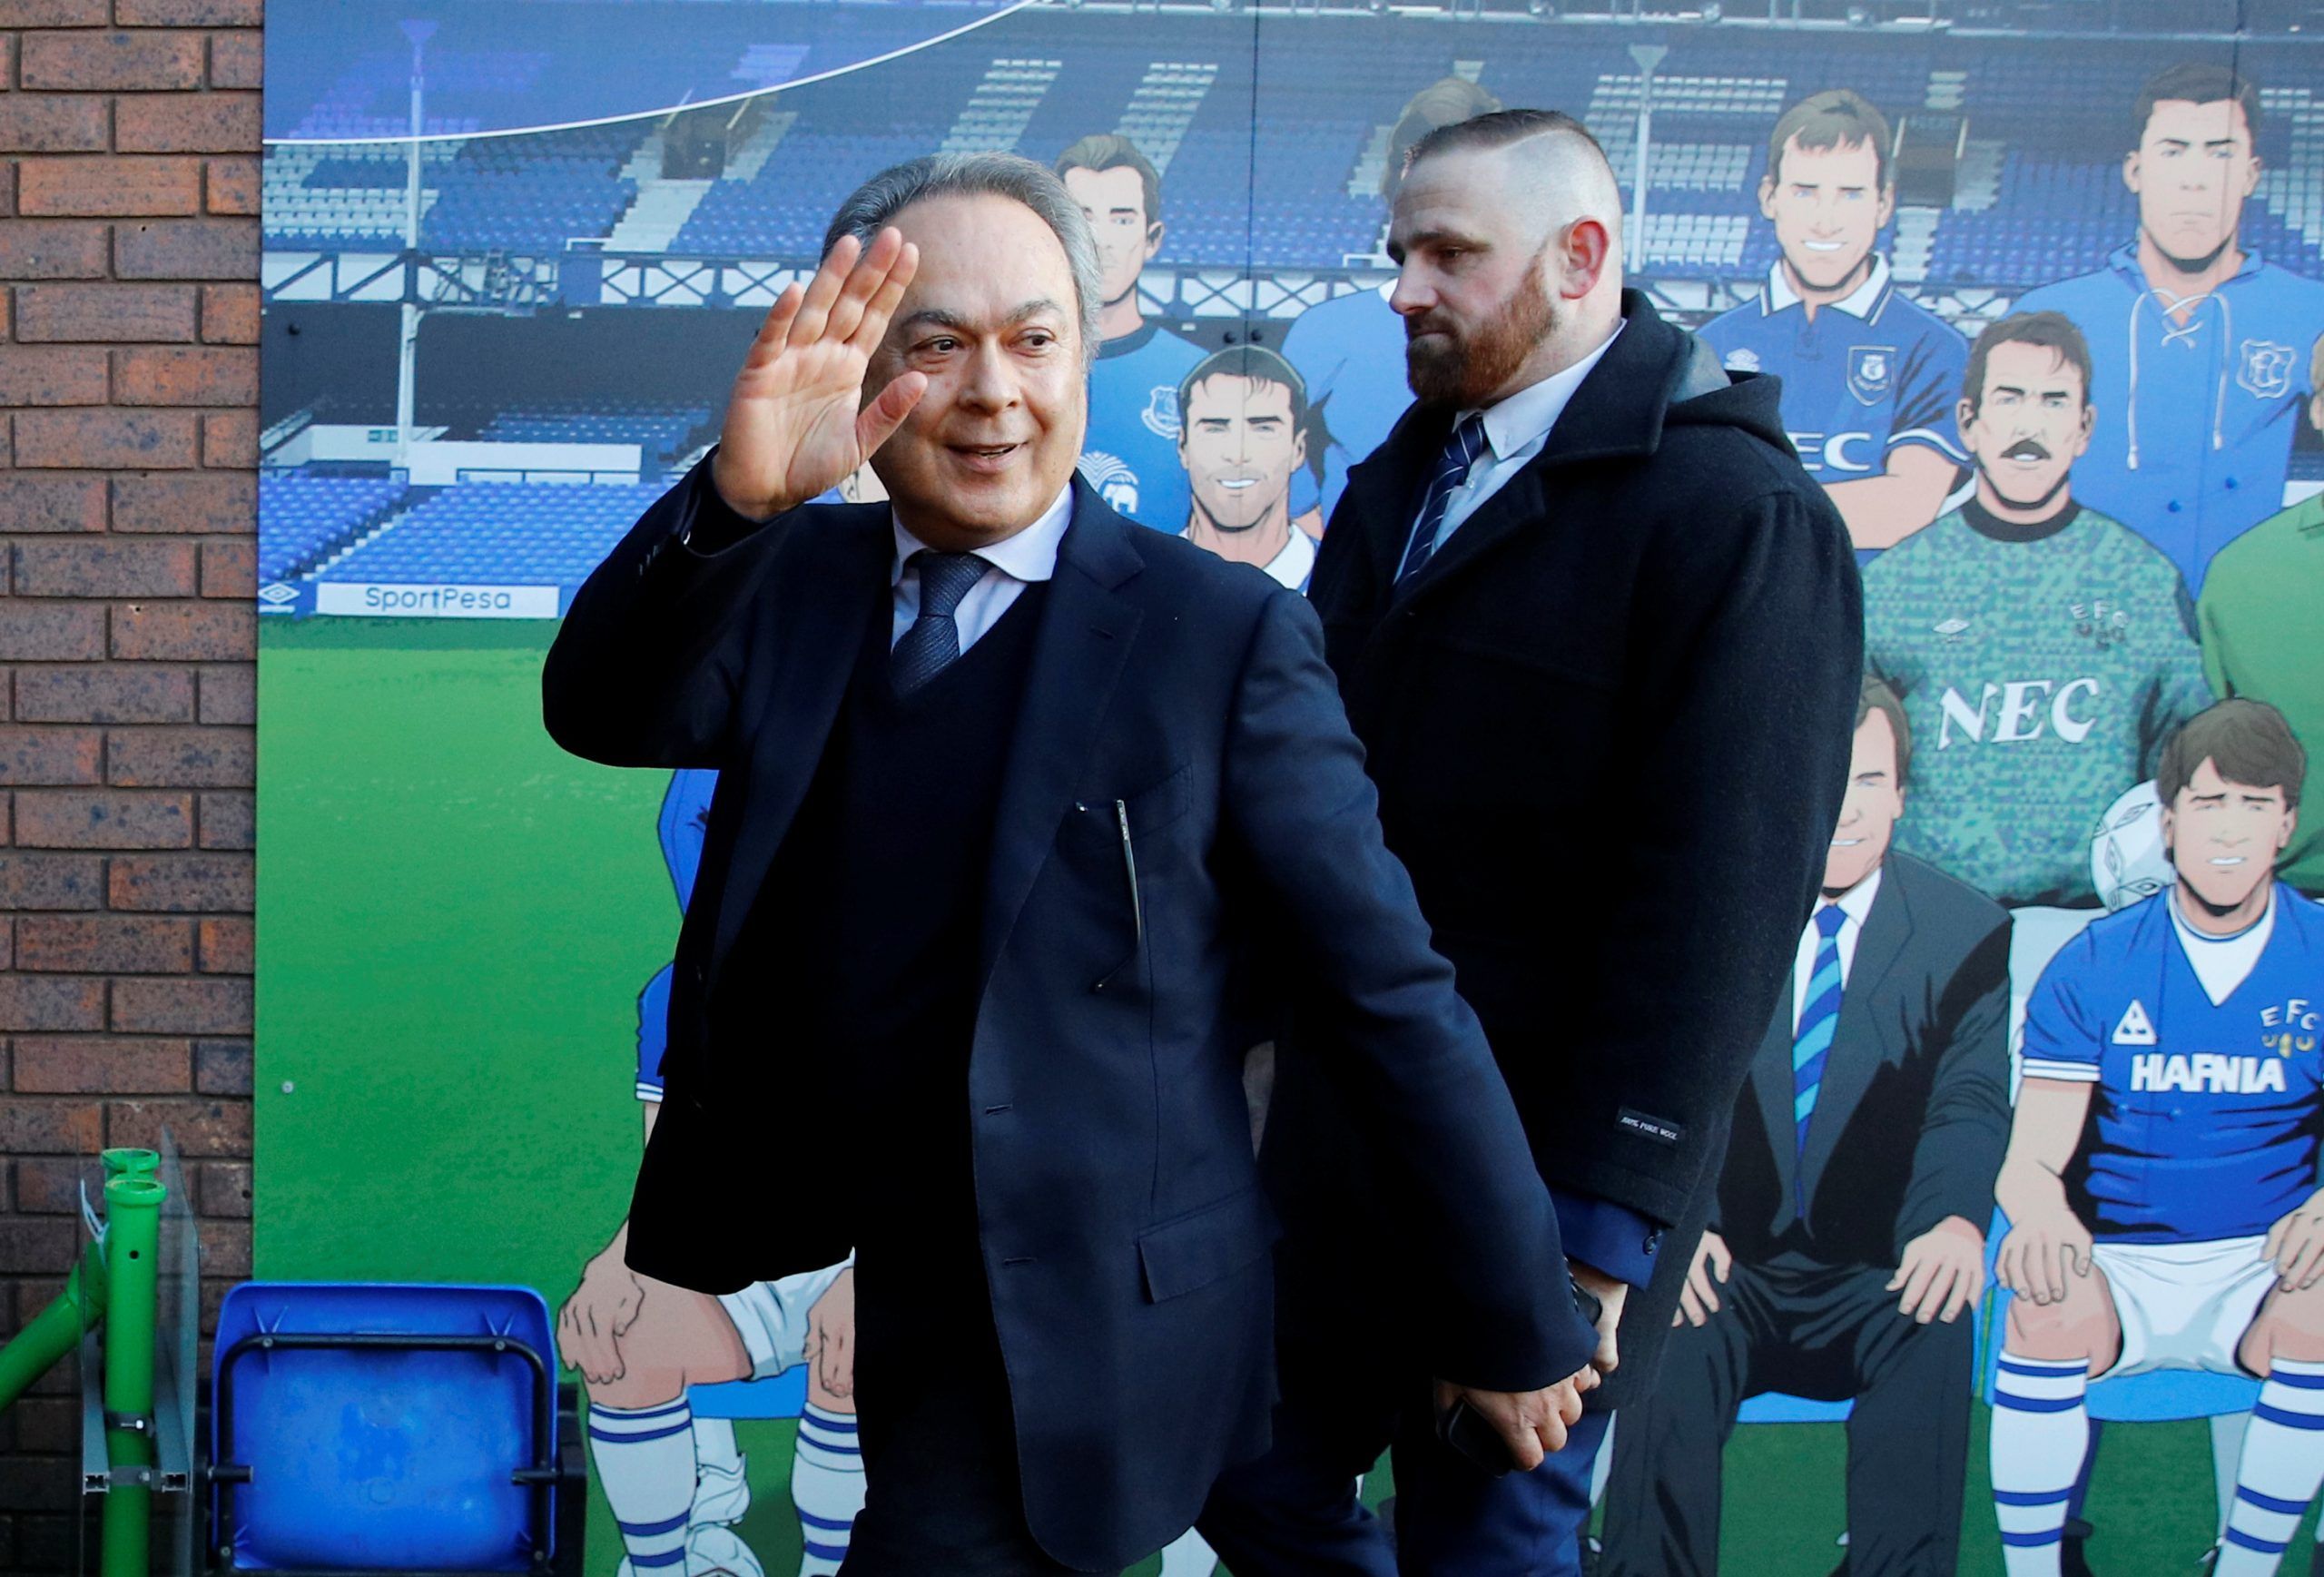 Soccer Football - Premier League - Everton v Arsenal - Goodison Park, Liverpool, Britain - December 21, 2019  Everton owner Farhad Moshiri arrives before the match   REUTERS/Phil Noble  EDITORIAL USE ONLY. No use with unauthorized audio, video, data, fixture lists, club/league logos or 